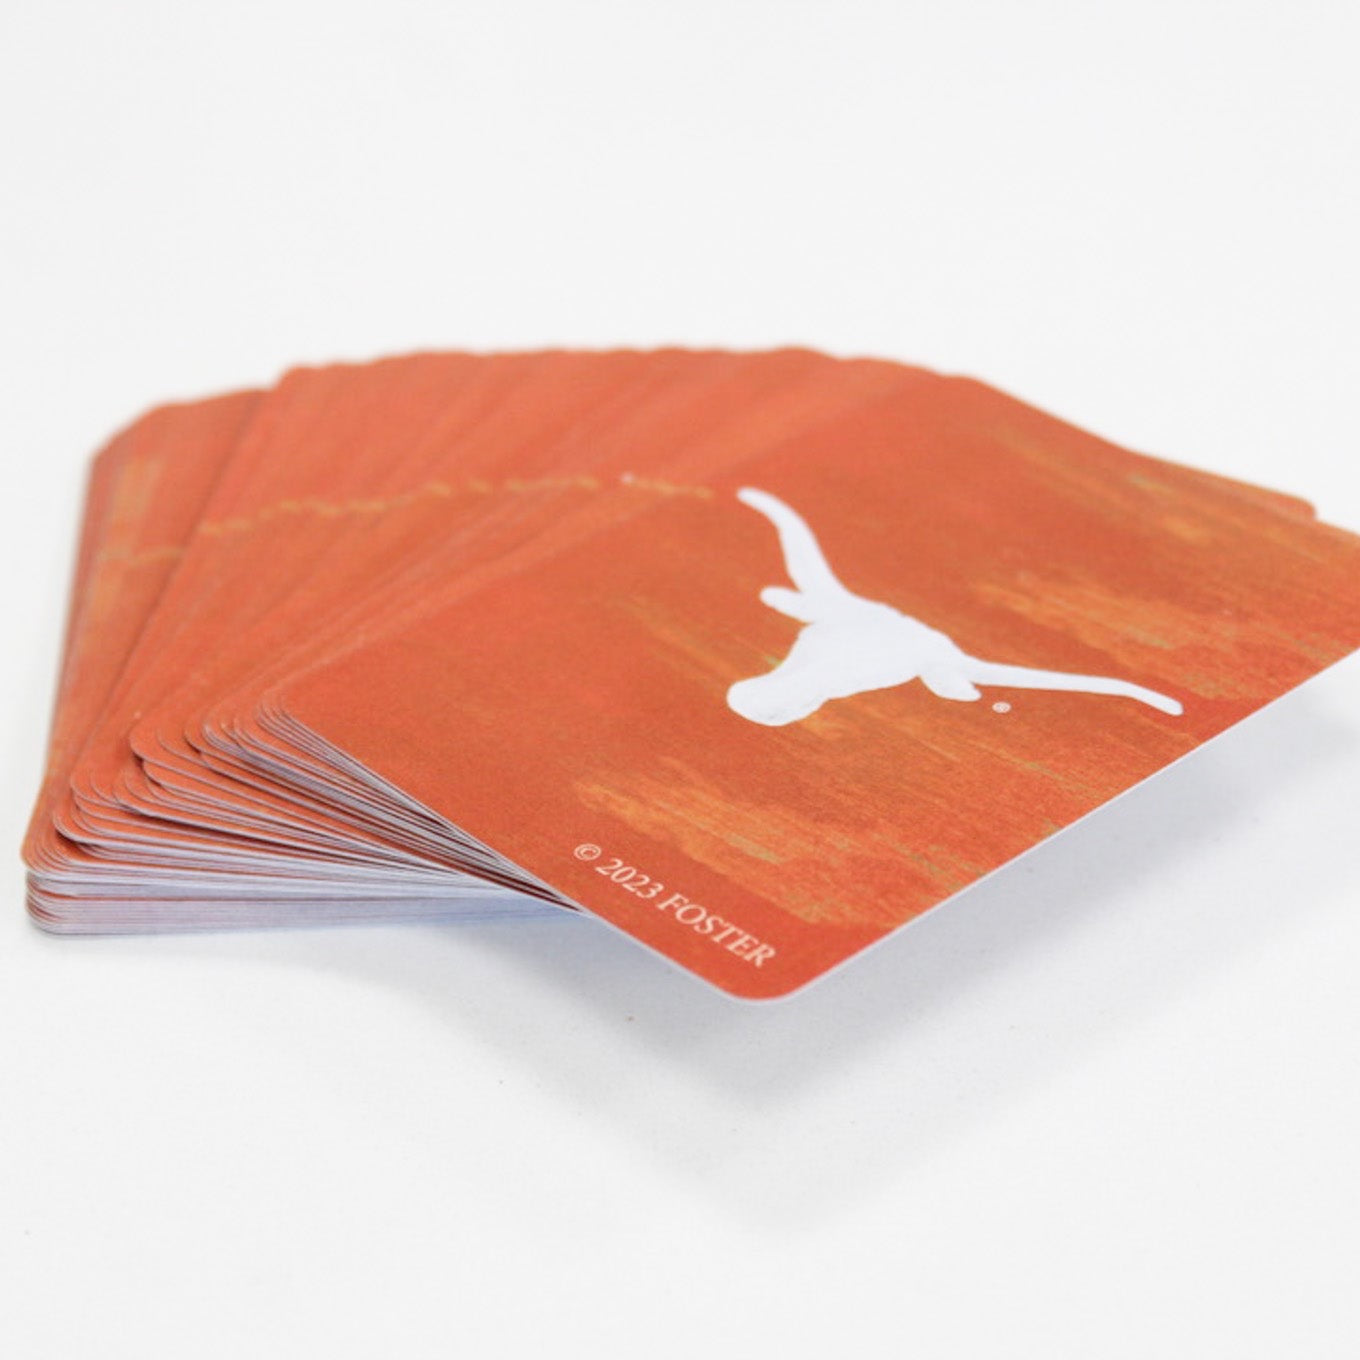 University of Texas Playing Cards